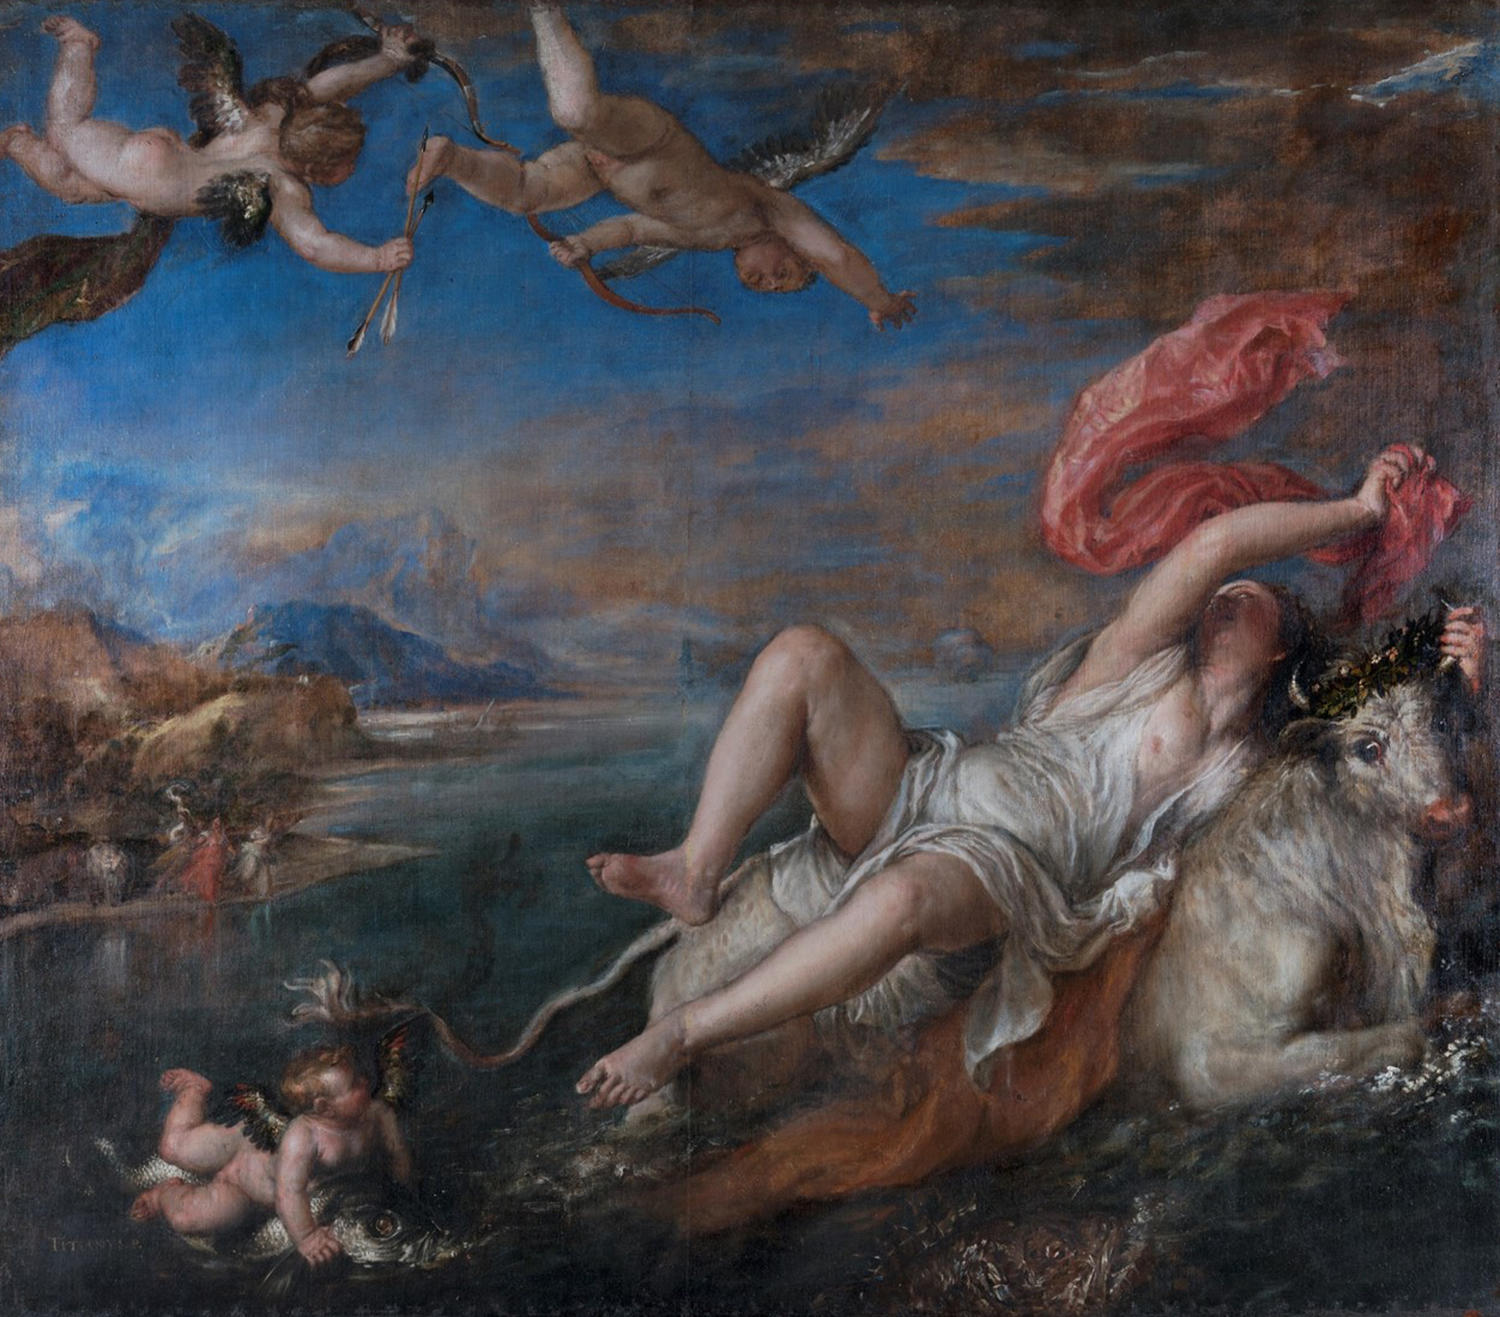 Titian's Europa, after cleaning.